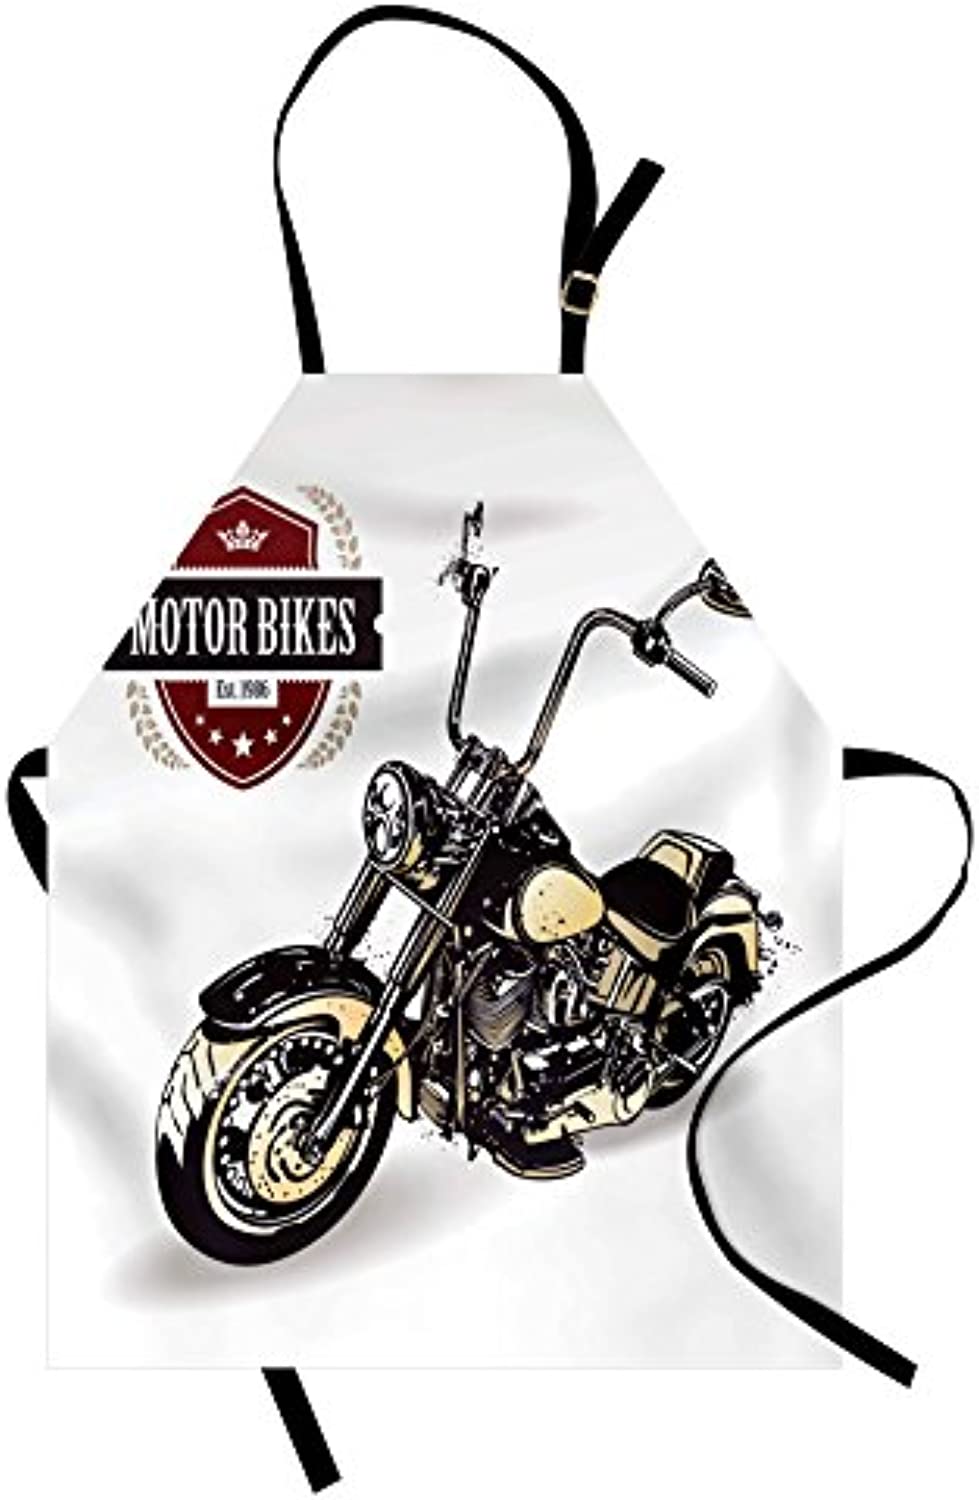 Granbey Motorcycle Apron  Chopper Customized Club Insignia Bikes Hippie Classic Retro Themed Print  Unisex Kitchen Bib with Adjustable Neck for Cooking Gardening  Adult Size  Black Beige